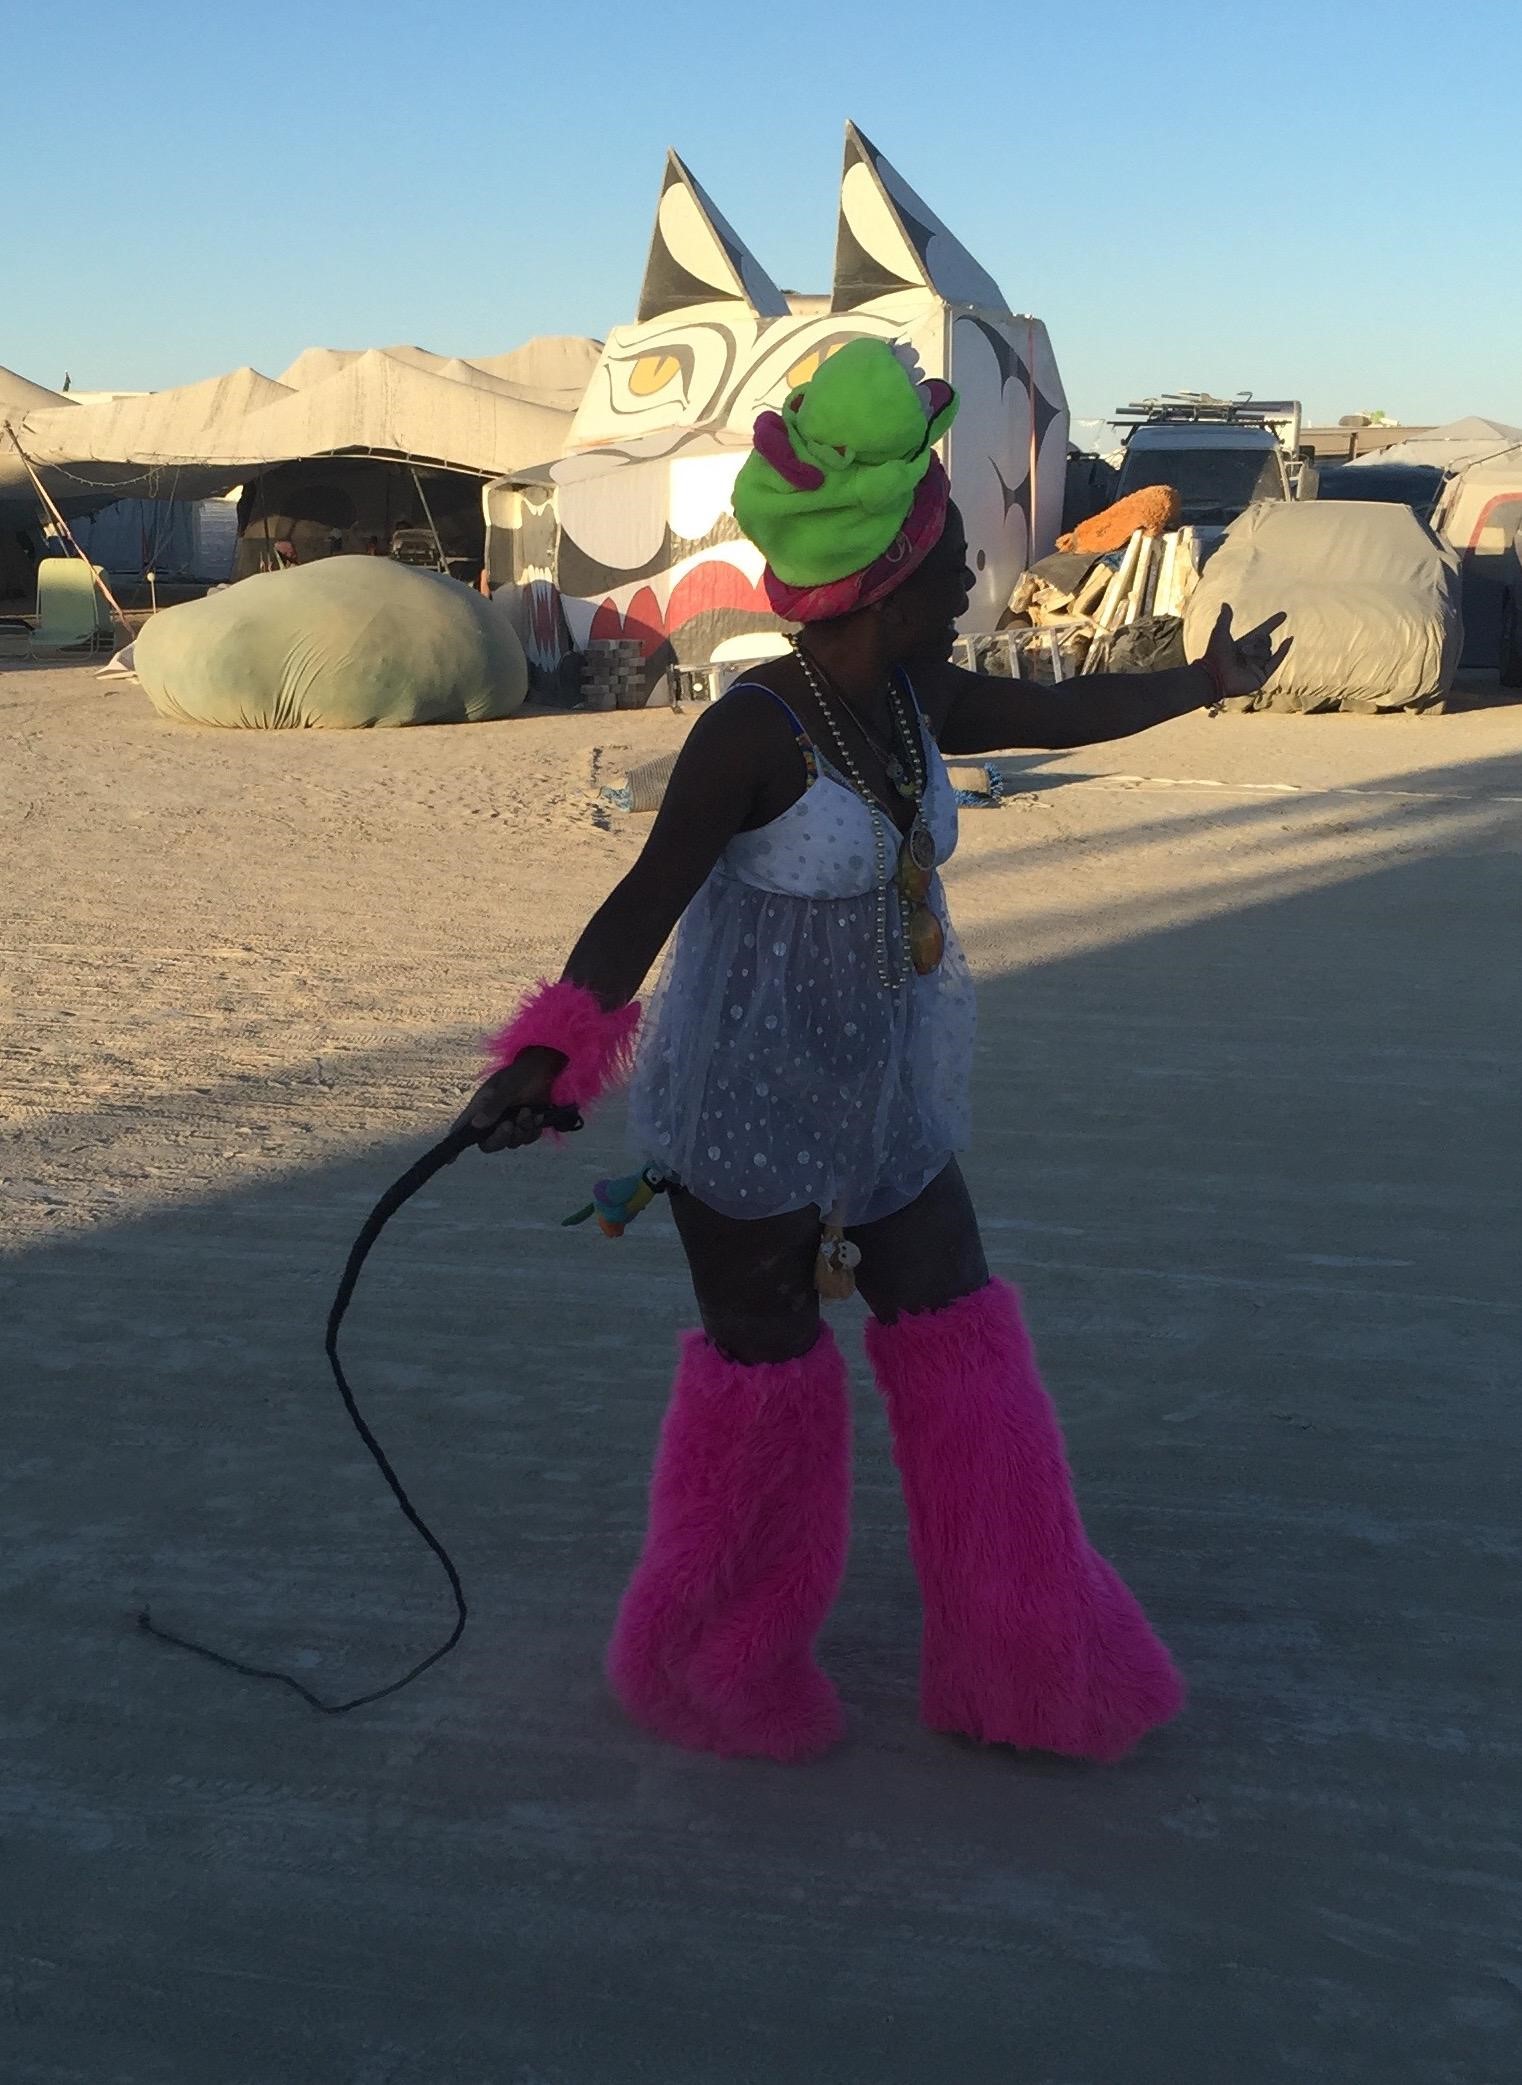 Radical black self-expression on the playa. Play takes many forms. 2015 (Photo by Vernon L. Andrews)